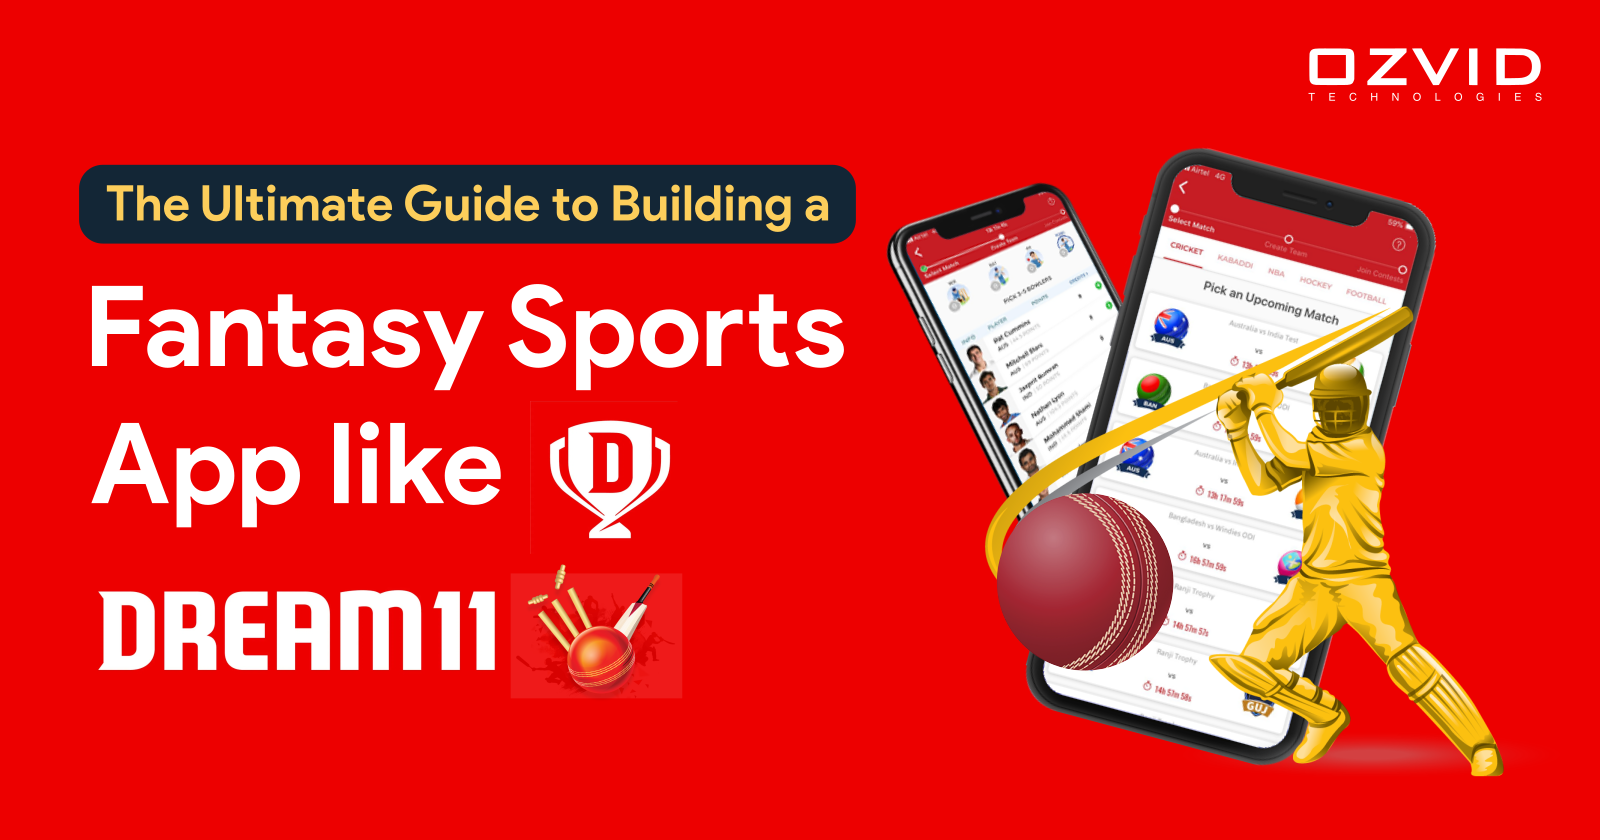 The Ultimate Guide to Building a Fantasy Sports App like Dream11